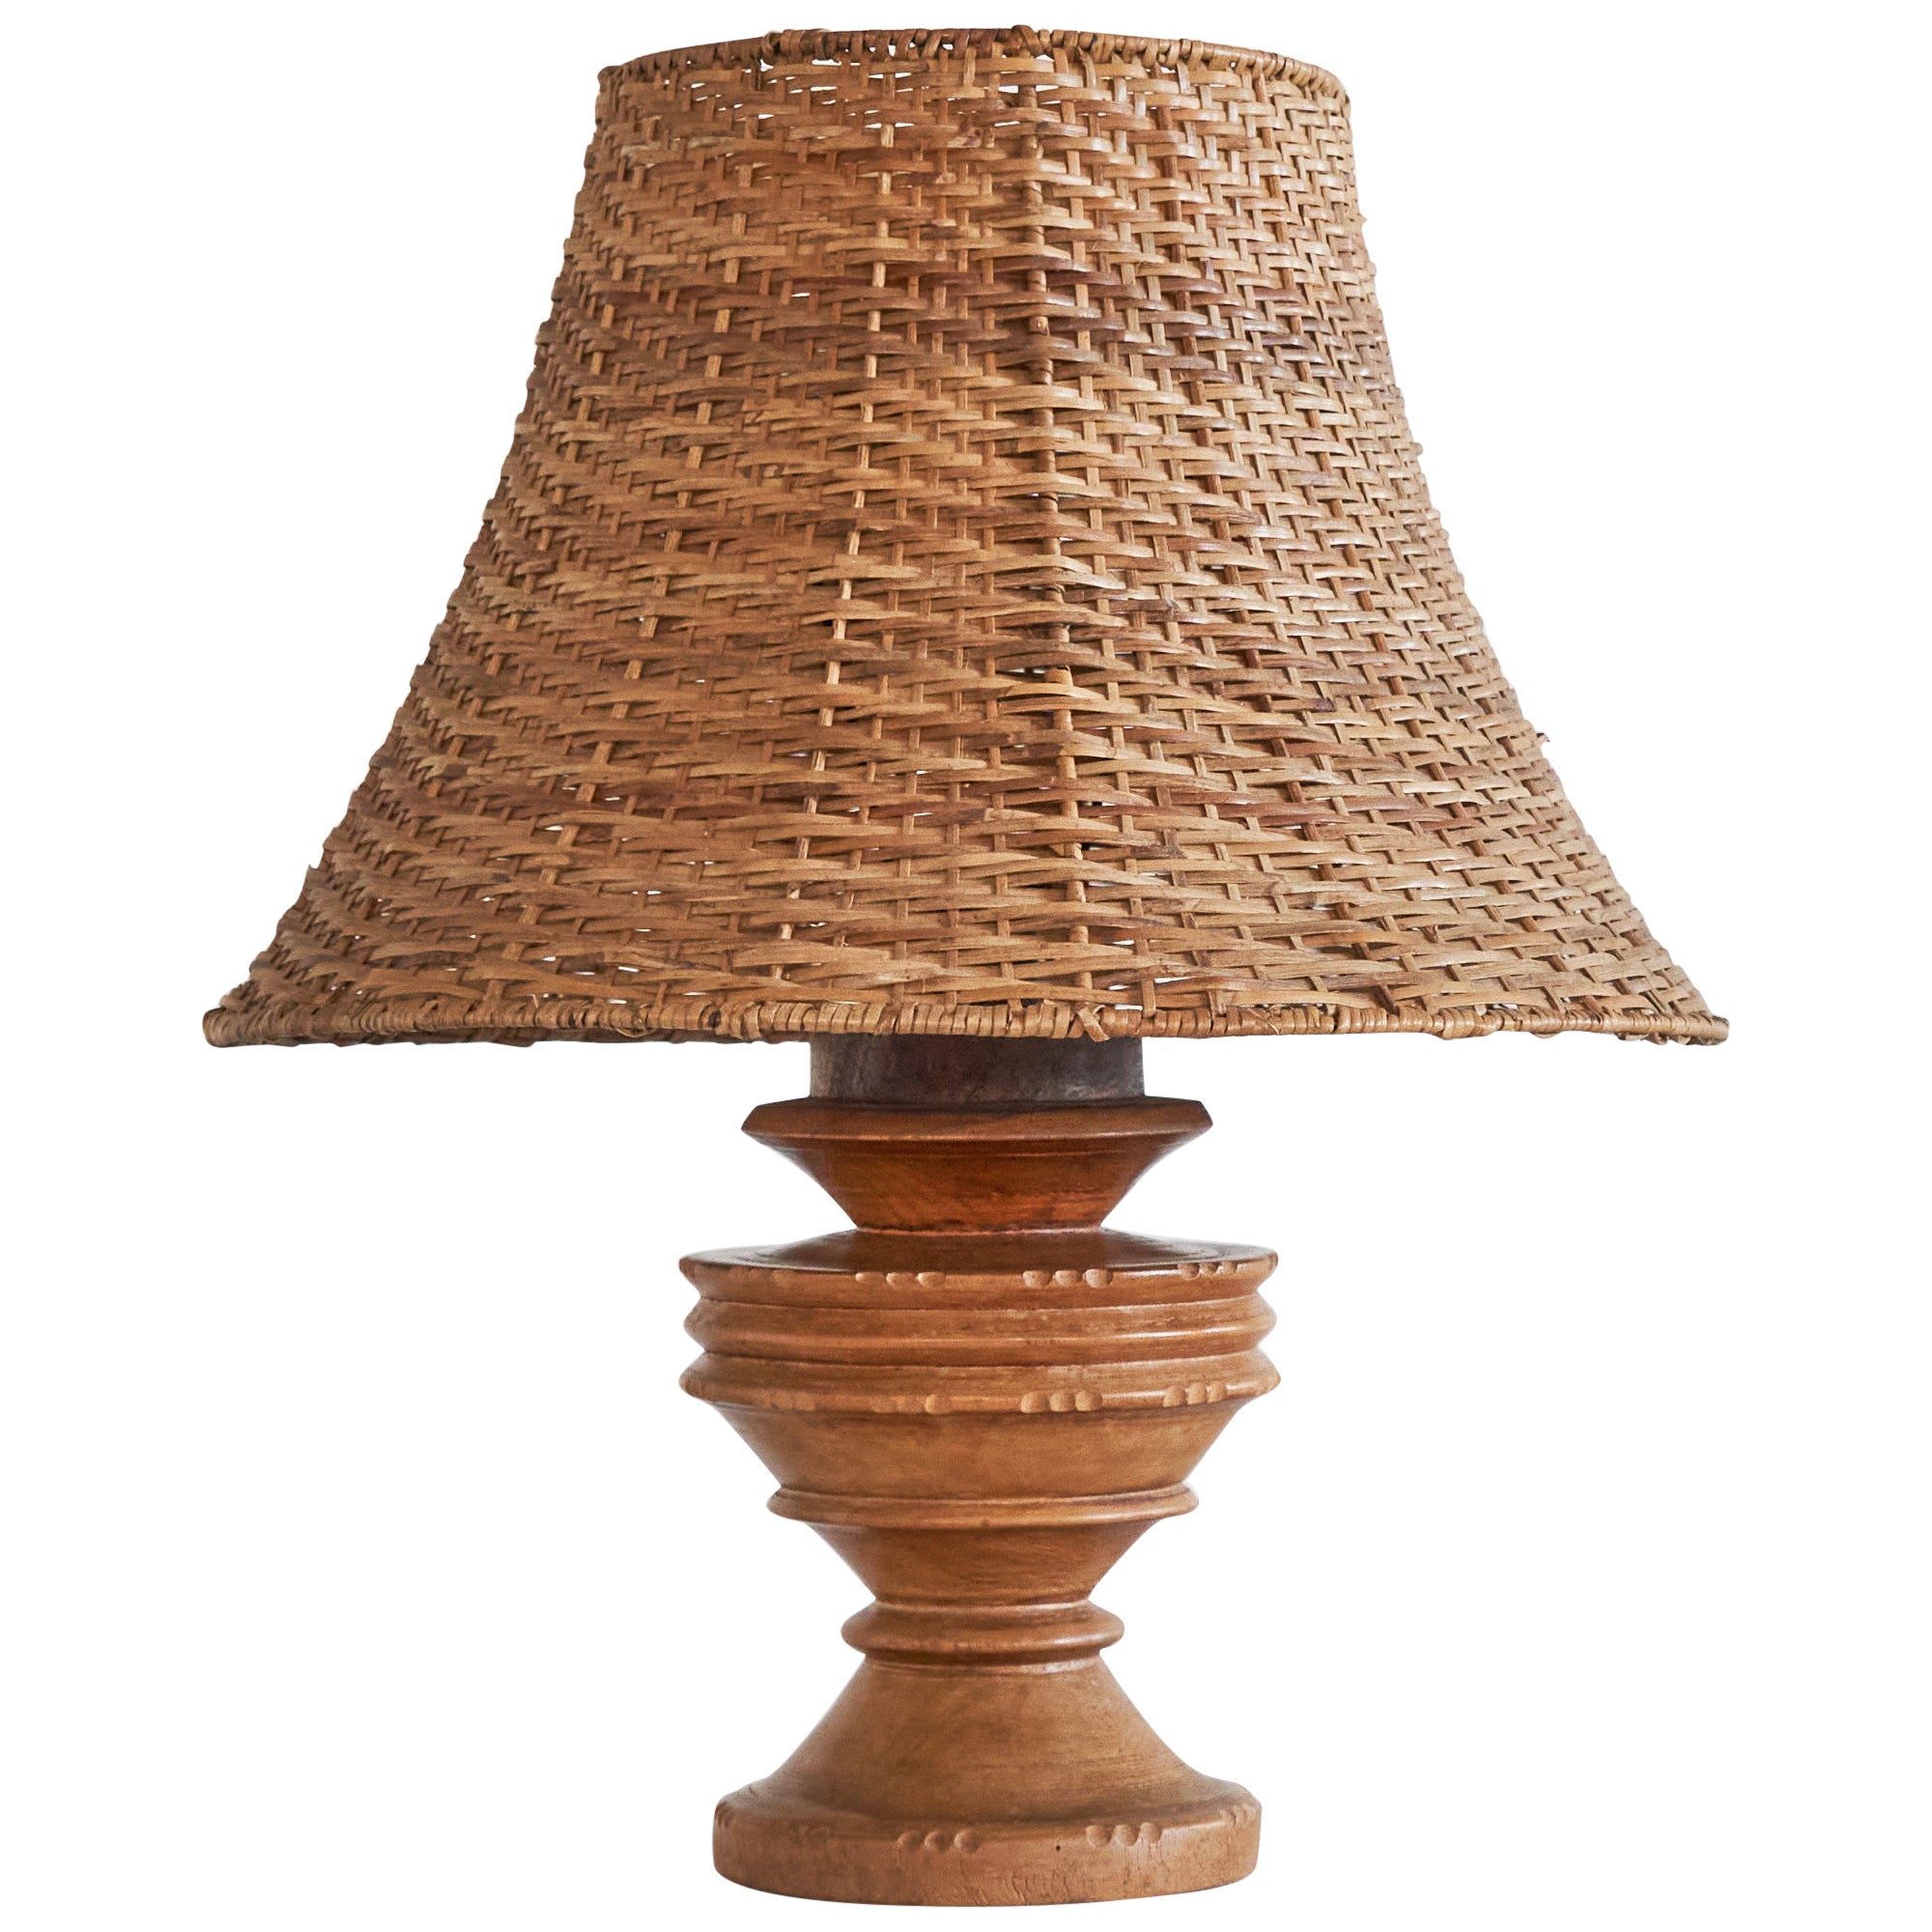 Wabi Sabi Antique Table Lamp in Turned and Carved Wood with Rattan Shade